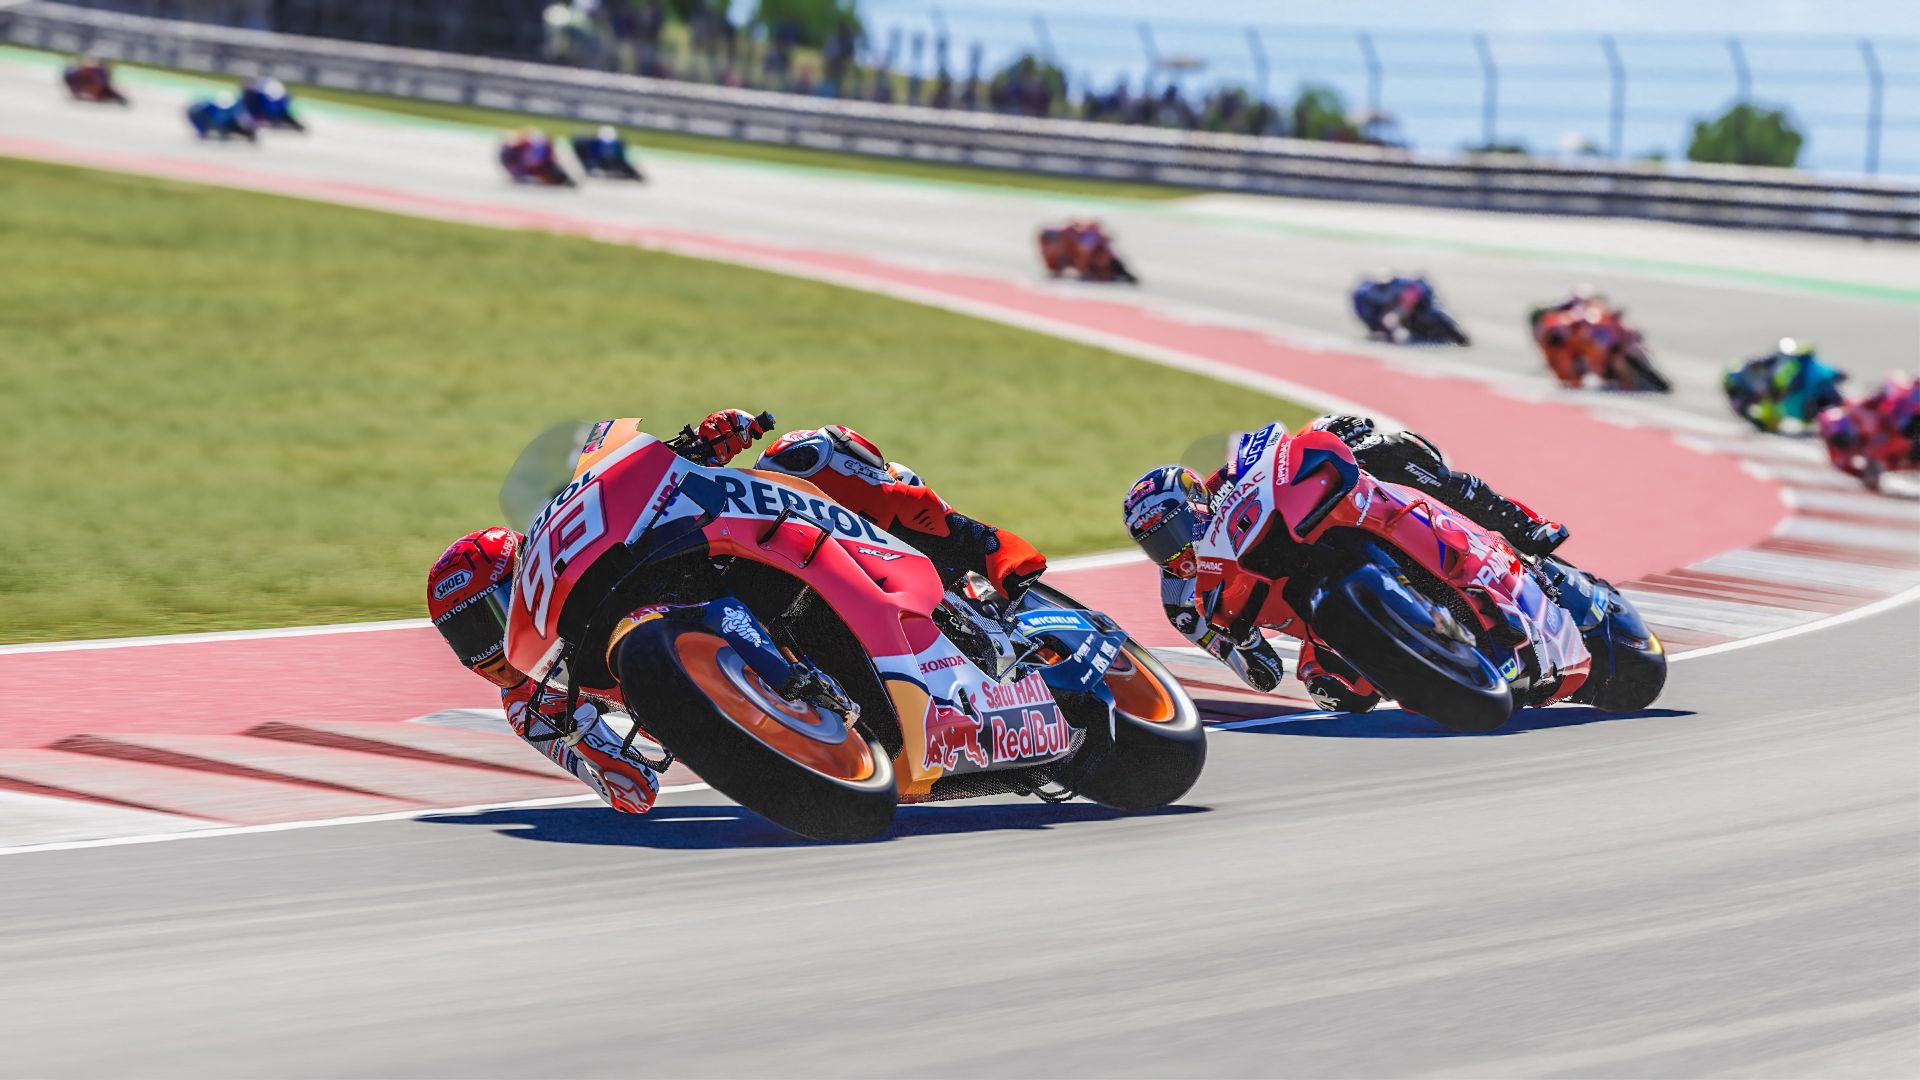 MotoGP 22 – April 20- Optimized for Xbox Series X|S ● Smart Delivery